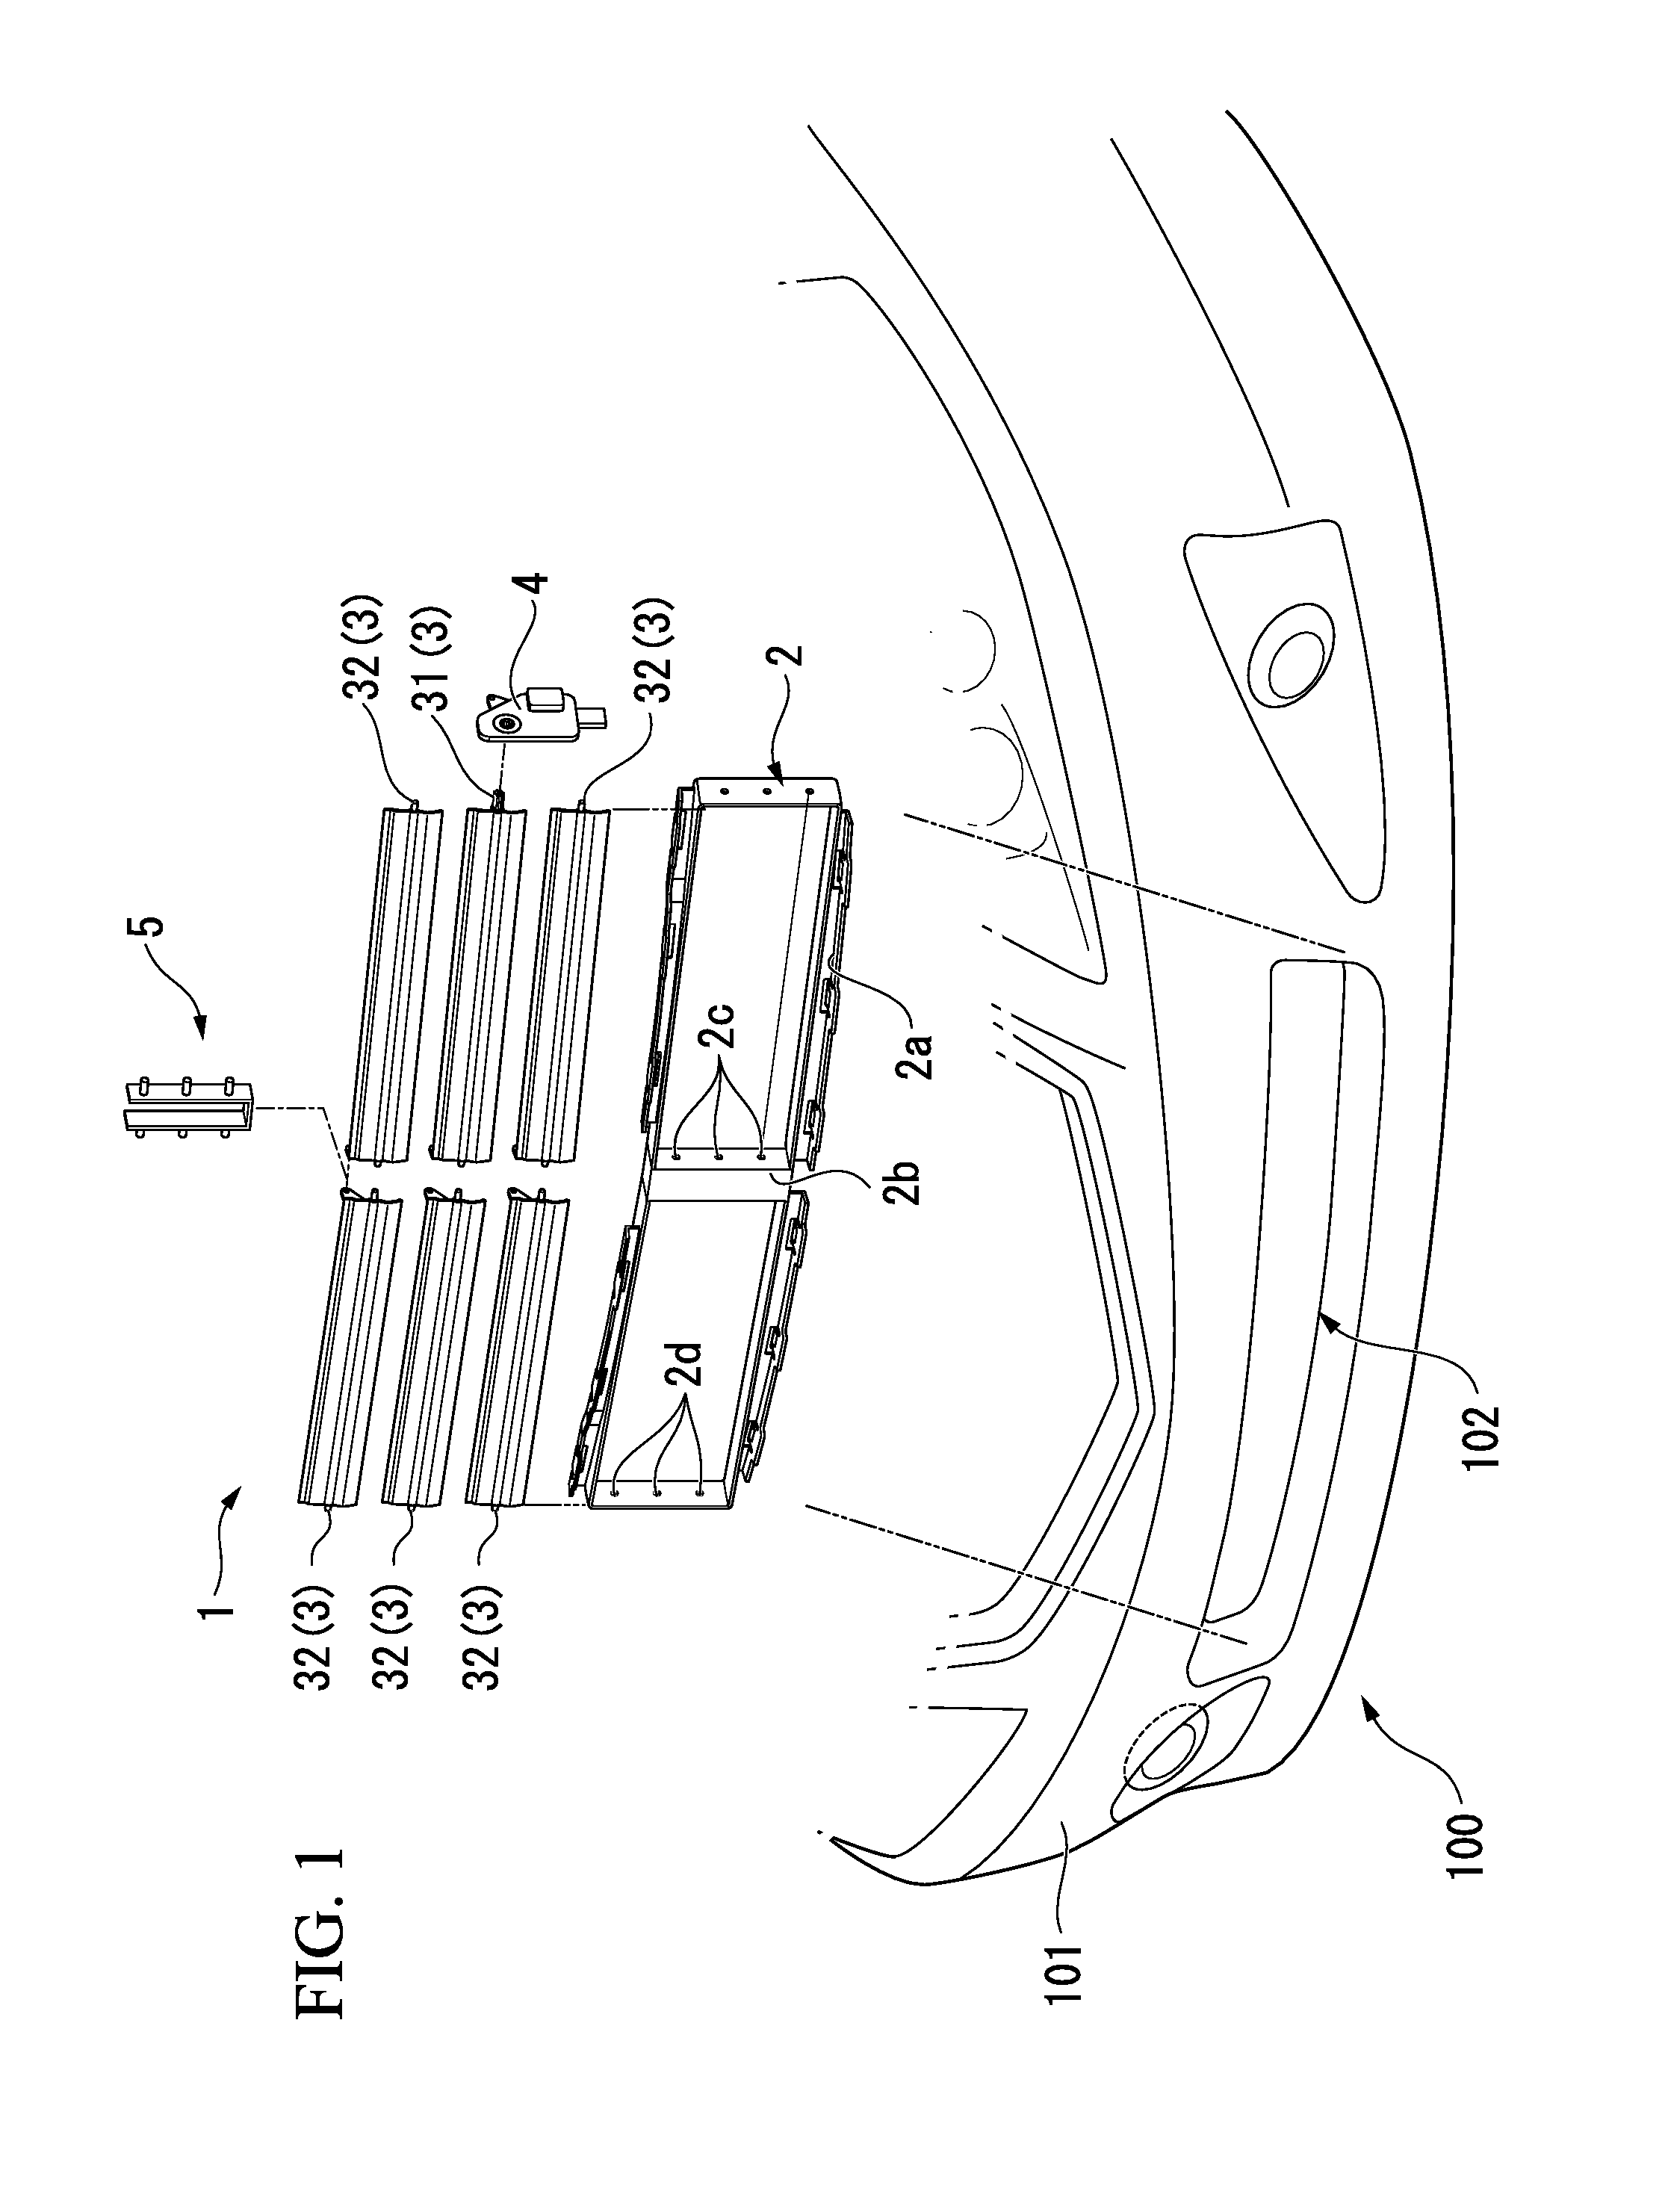 Vehicle grill shutter, vehicle flap member, and actuator